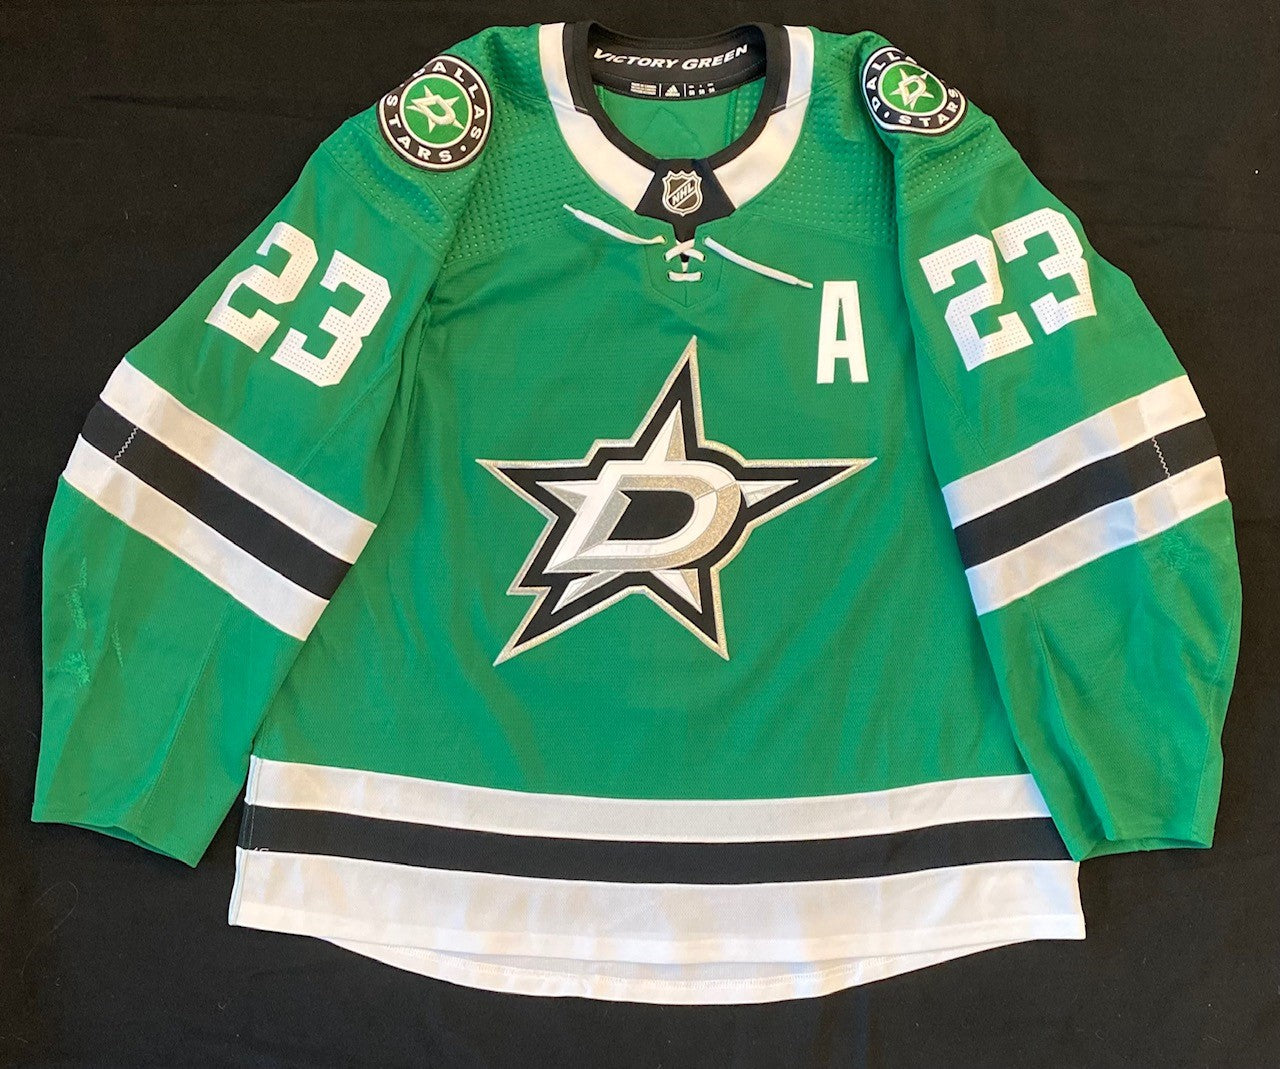 Esa Lindell 20/21 Home Set 1 Game Worn Jersey in Green - Front View